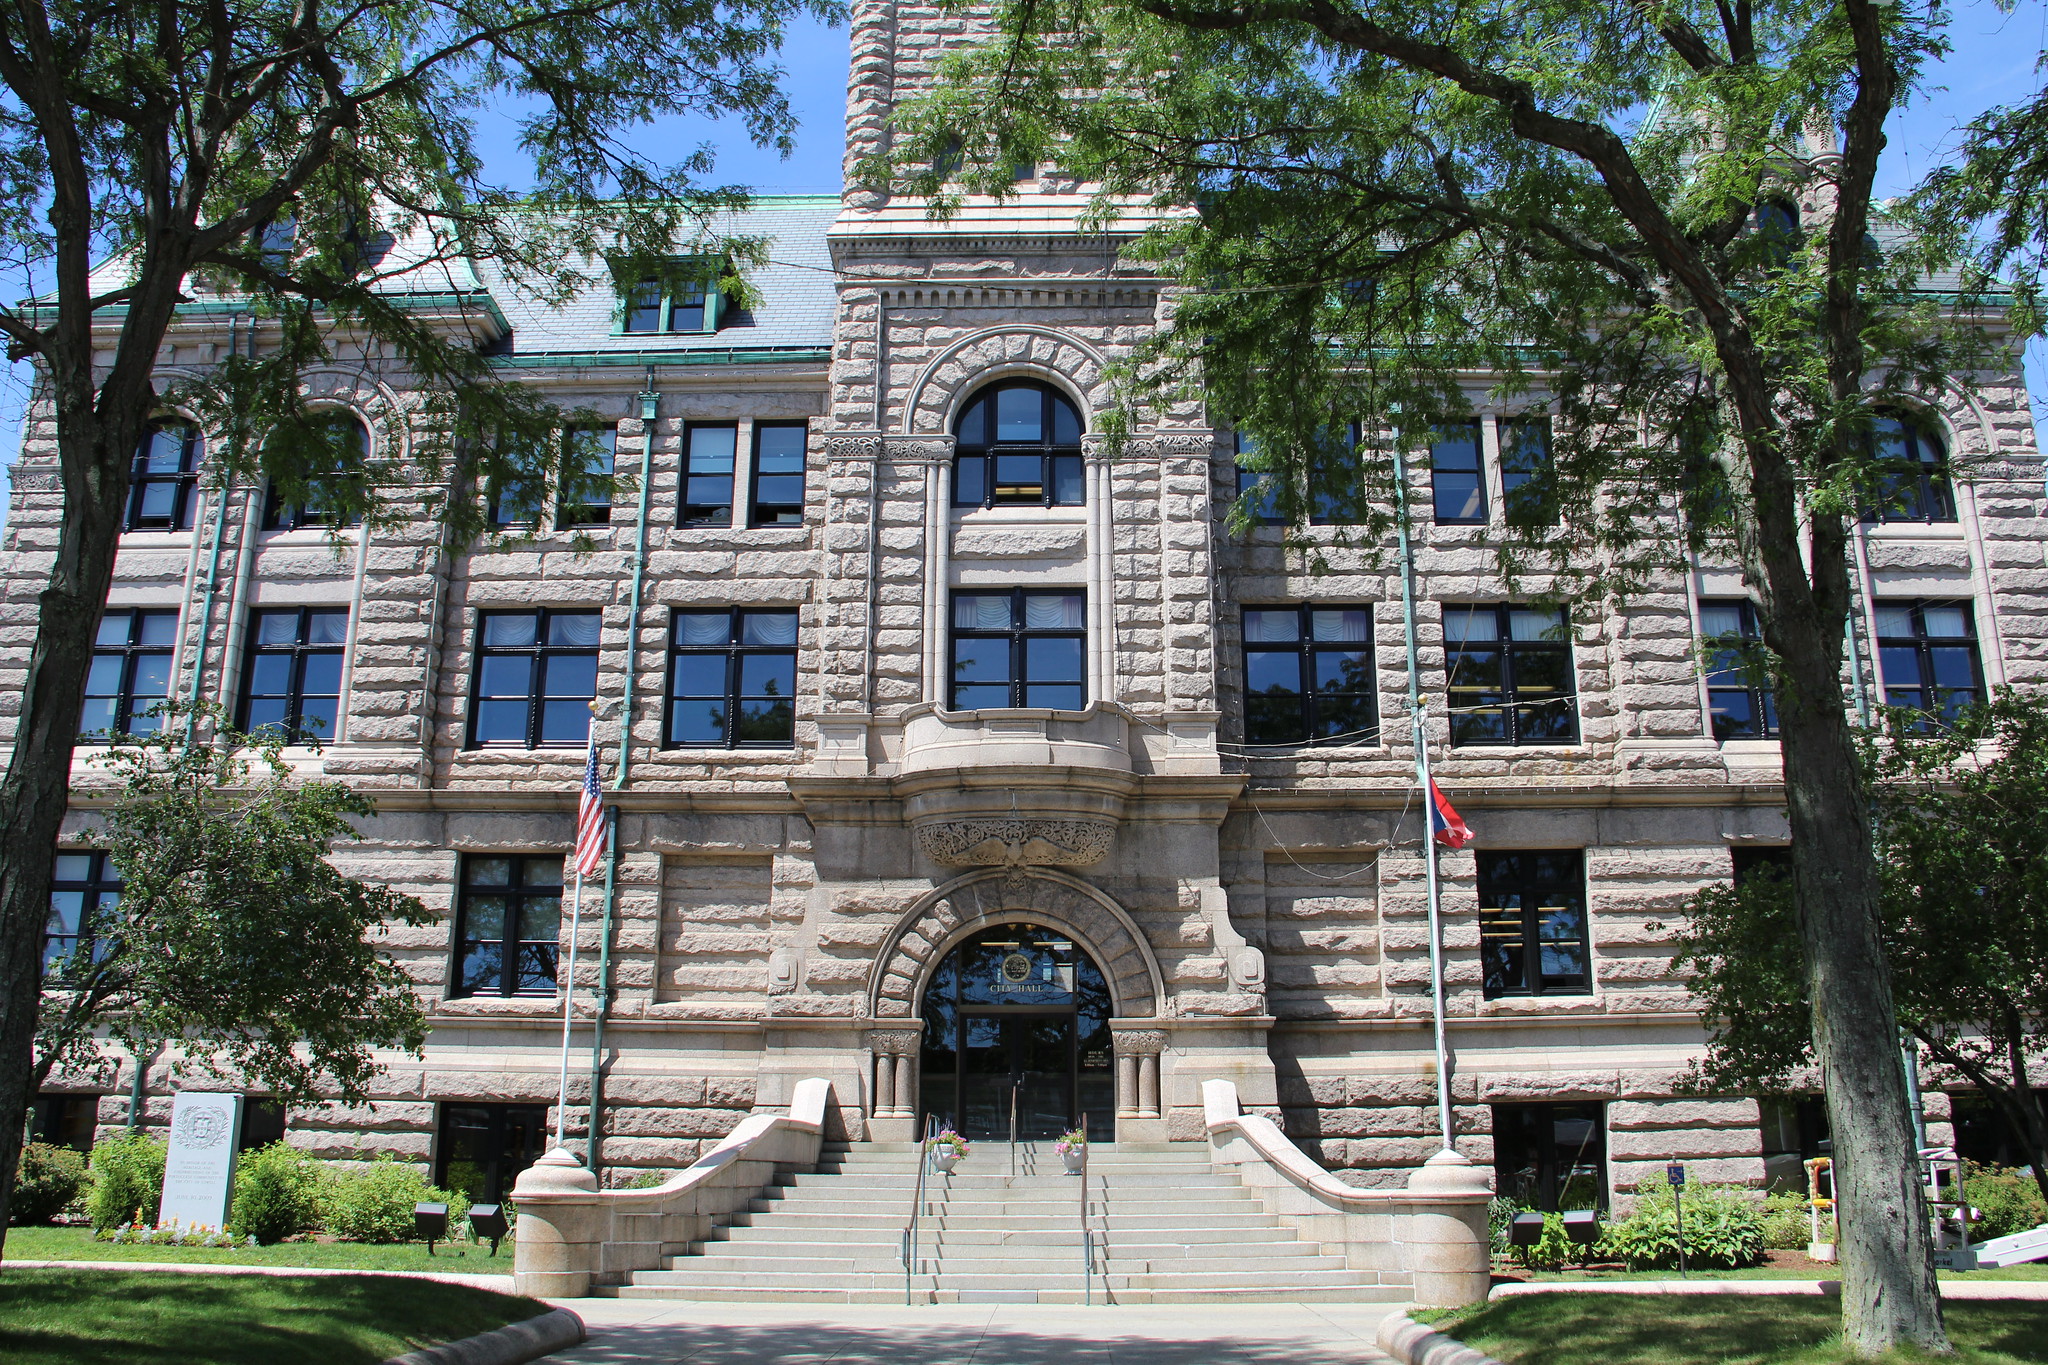 The outside of Lowell City Hall, a Richardsonian Romanesque style building completed in 1893